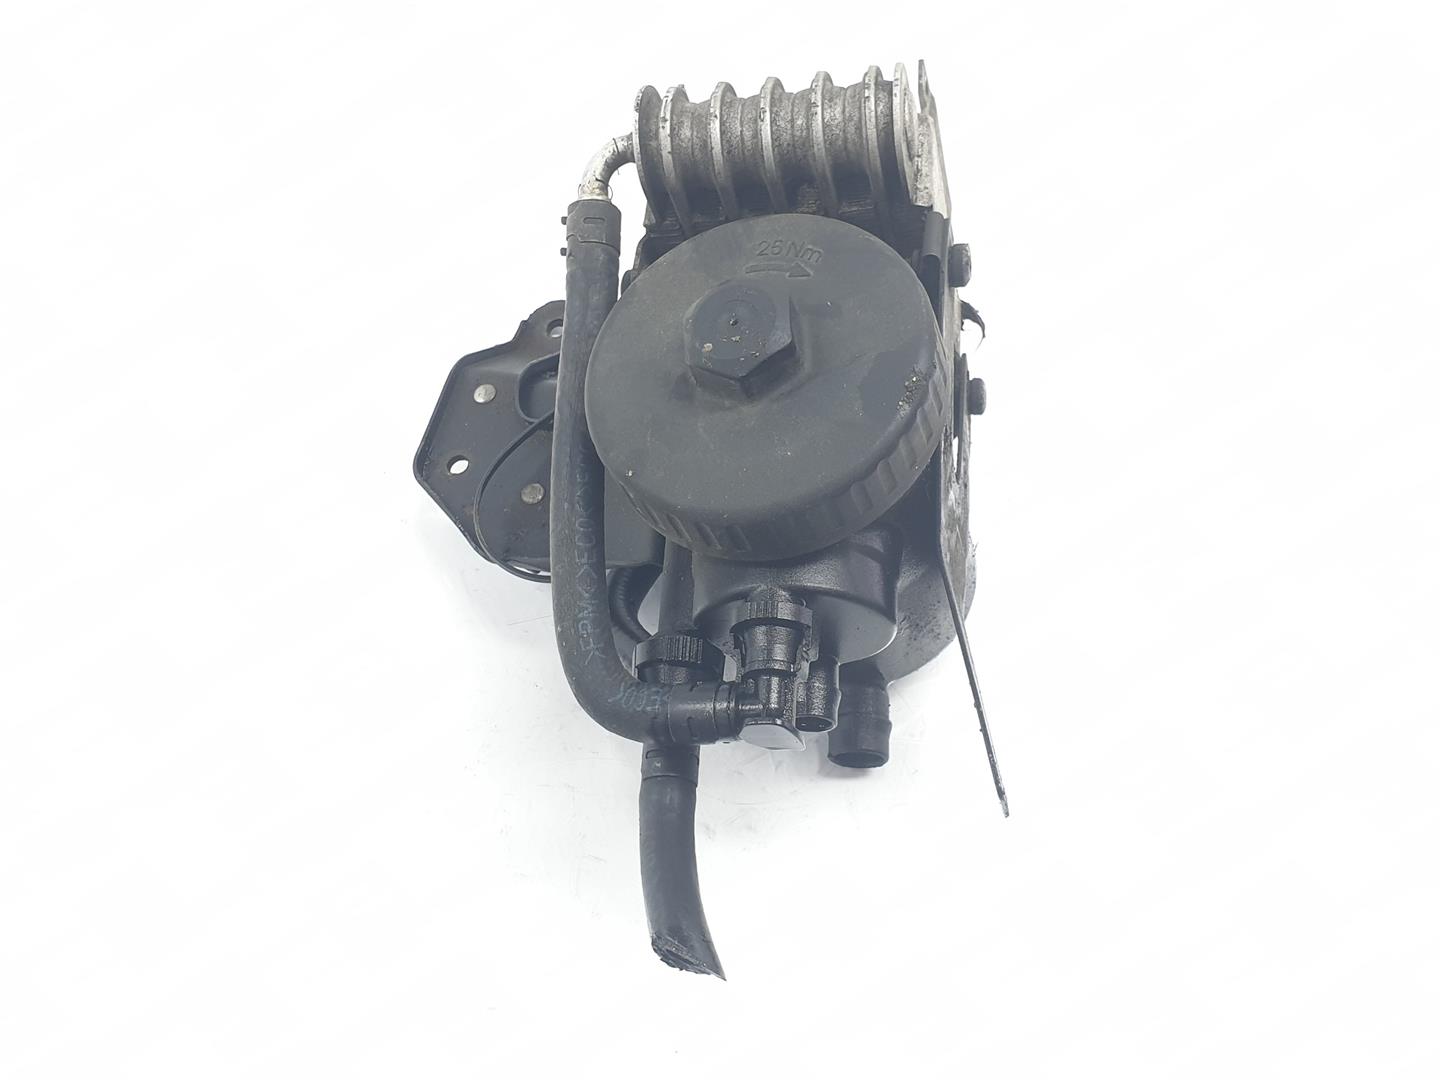 BMW 3 Series E46 (1997-2006) Other Engine Compartment Parts 13322247411, 13322247411 24237173